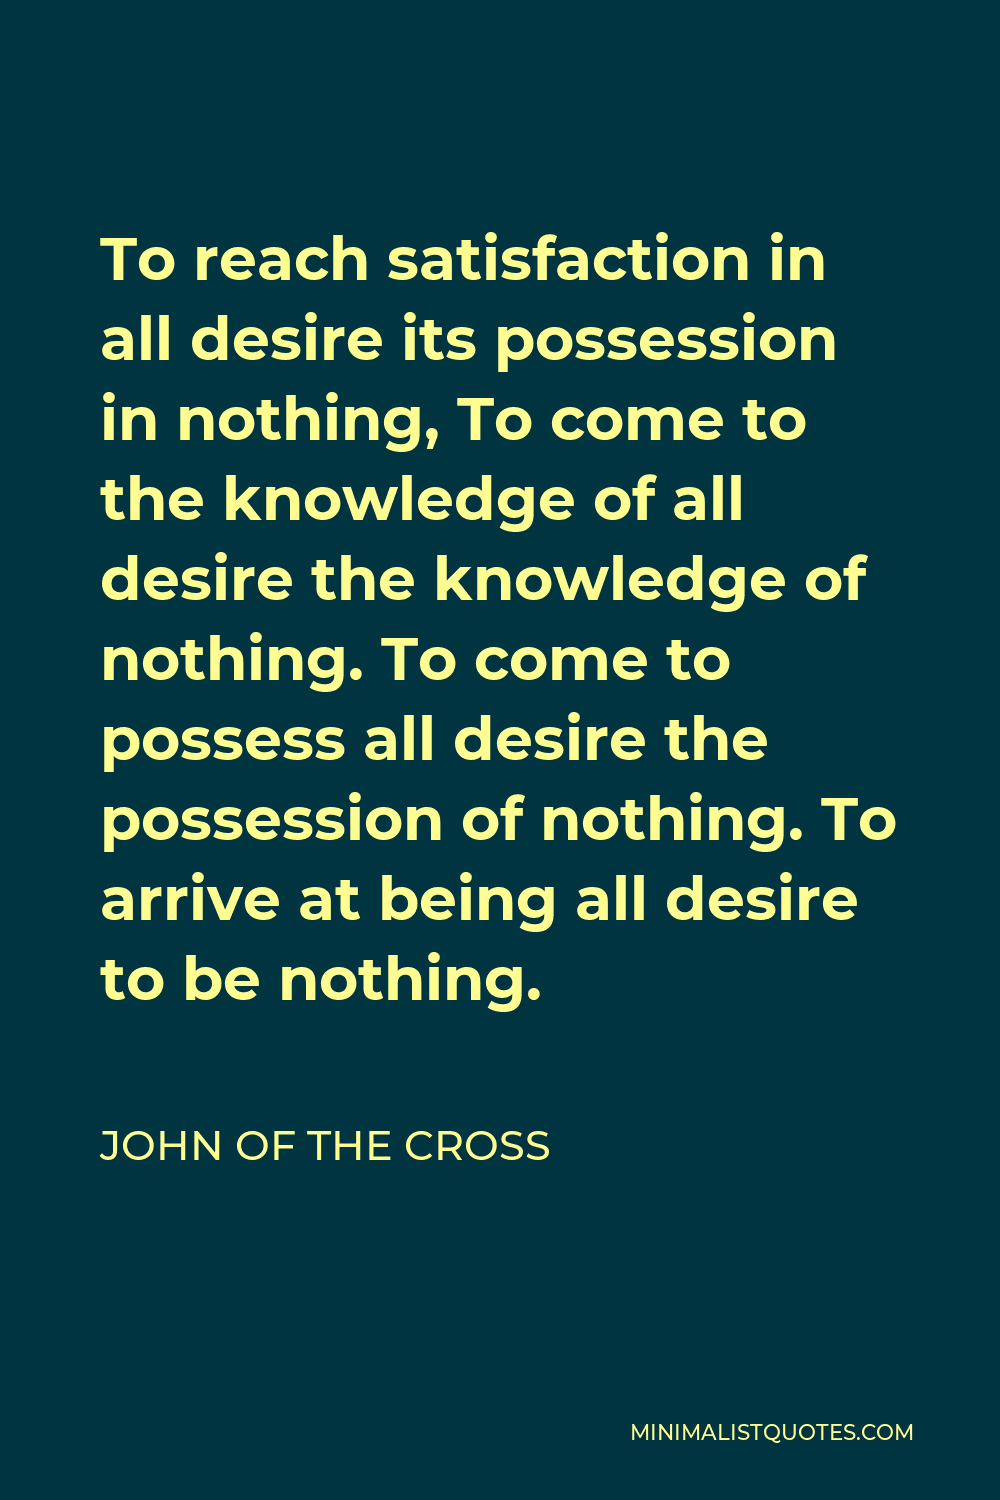 John of the Cross Quote - To reach satisfaction in all desire its possession in nothing, To come to the knowledge of all desire the knowledge of nothing. To come to possess all desire the possession of nothing. To arrive at being all desire to be nothing.